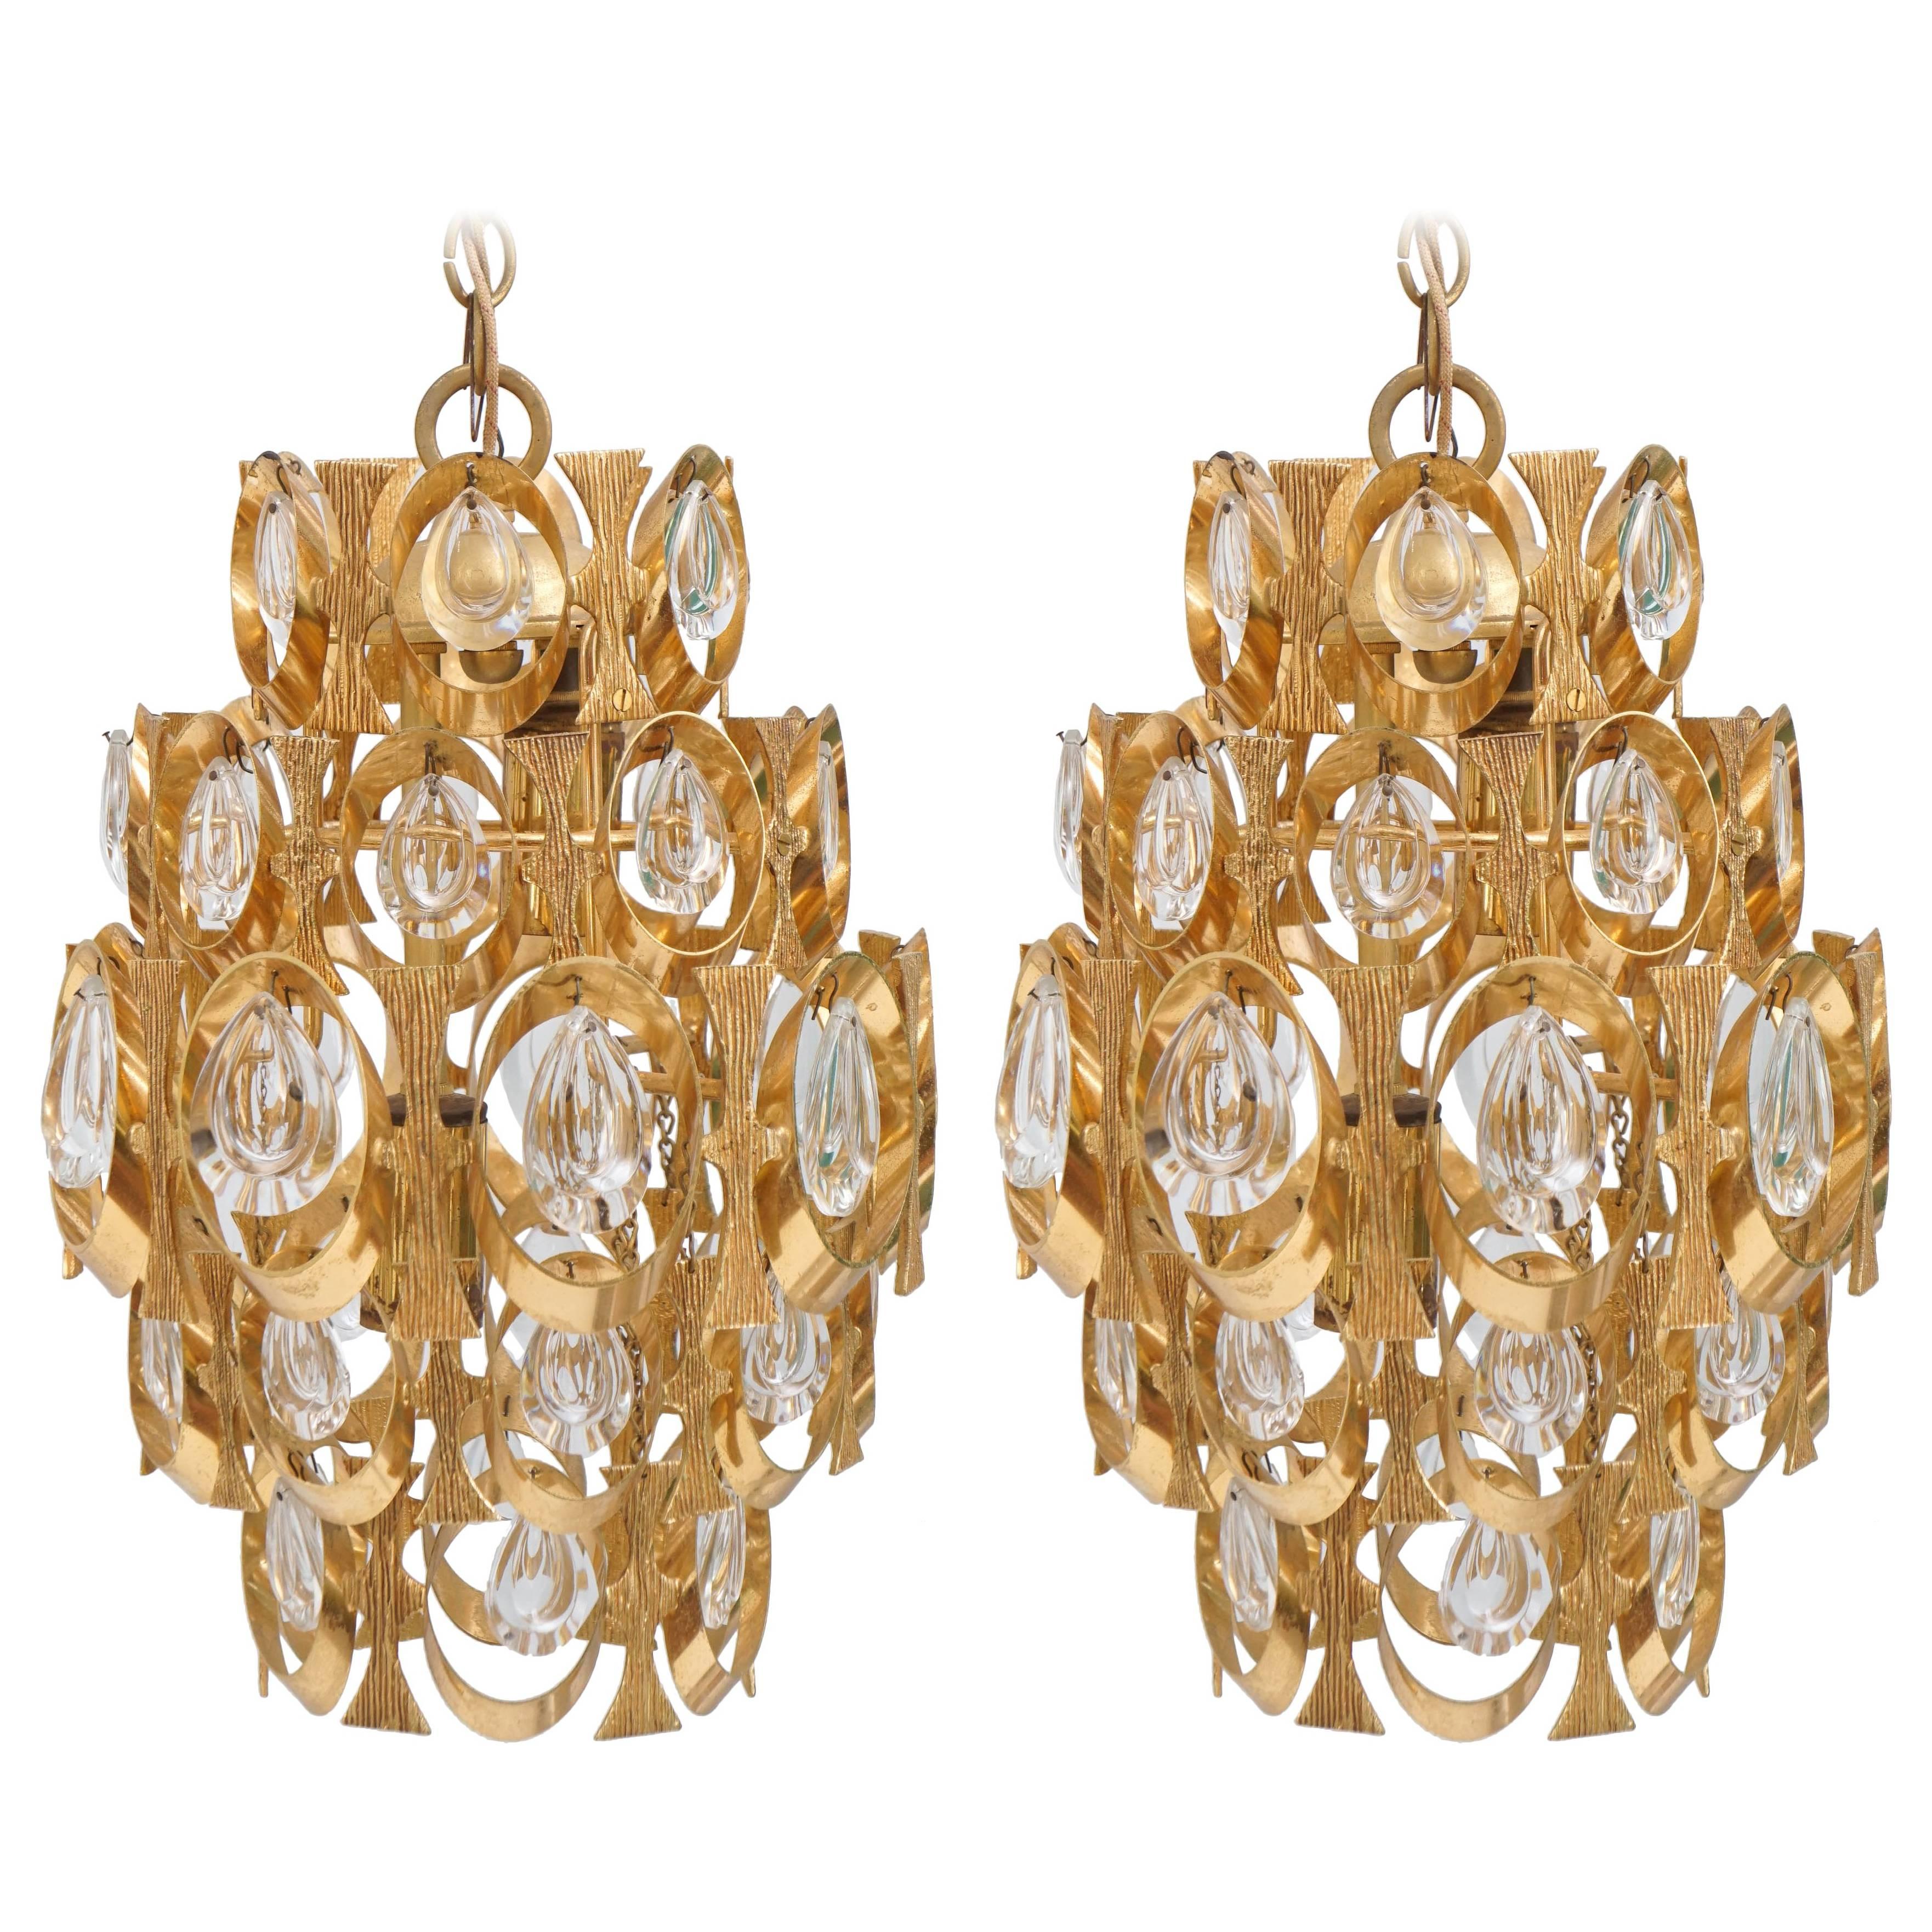 A pair of Sciolari Gold Plated Hanging Prism Light, Chandelier or Pendant For Sale